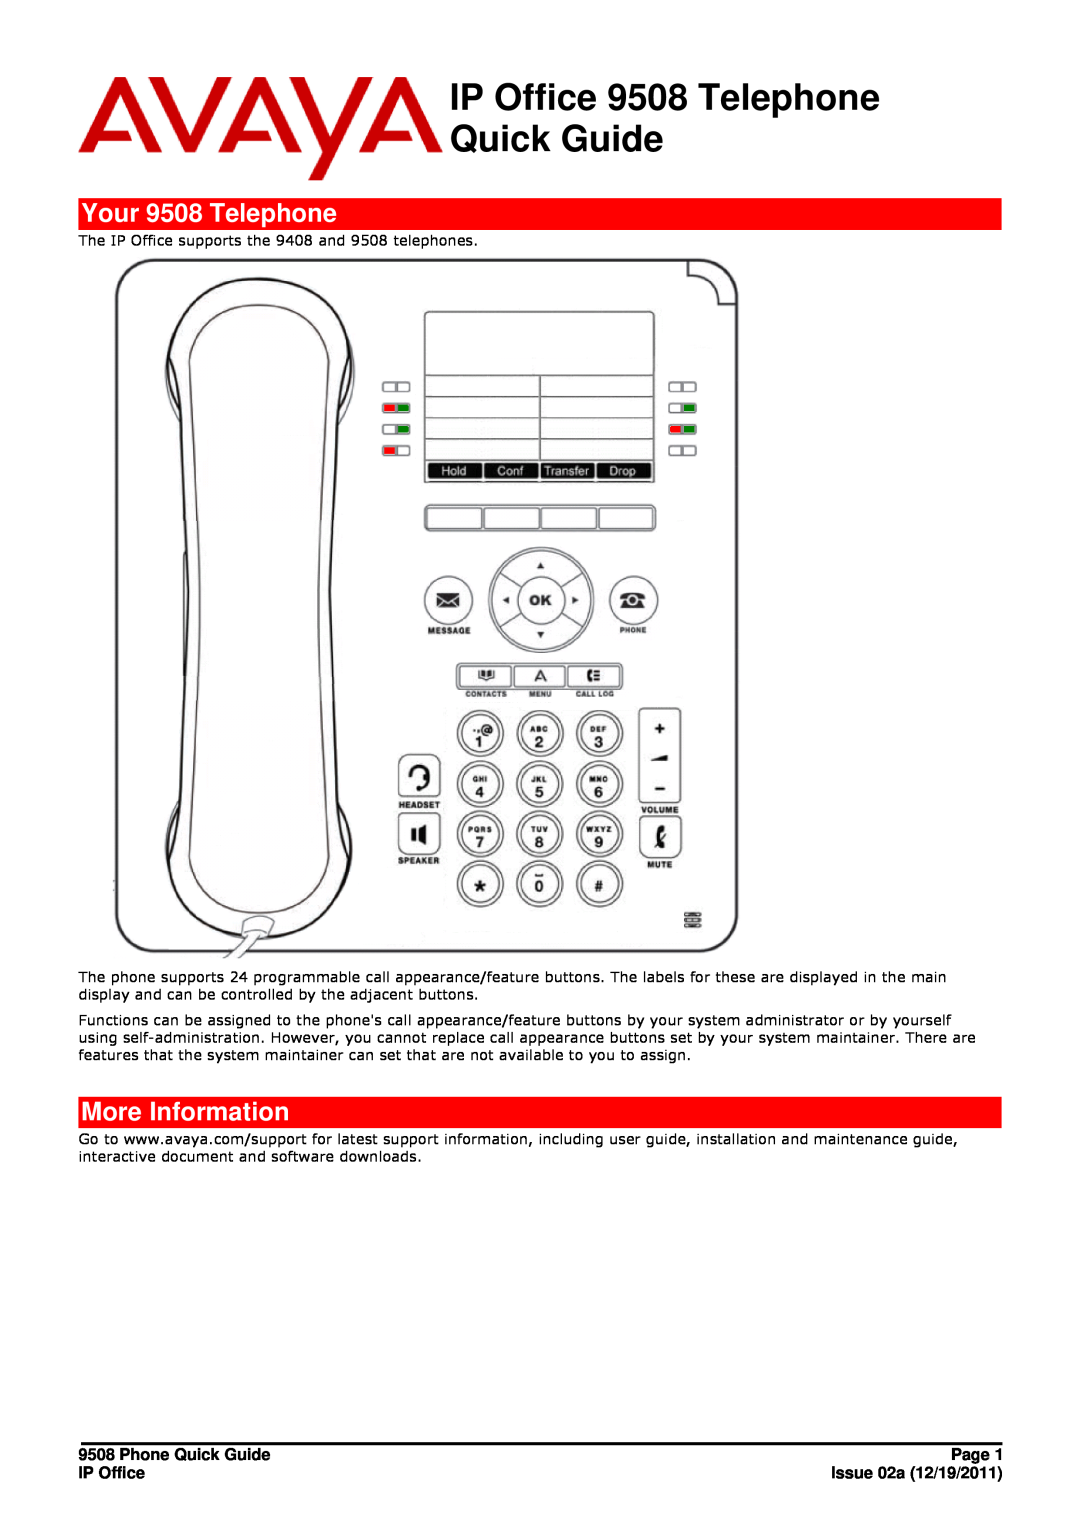 Avaya manual Your 9508 Telephone, More Information, Phone Quick Guide, Page, IP Office, Issue 02a 12/19/2011 